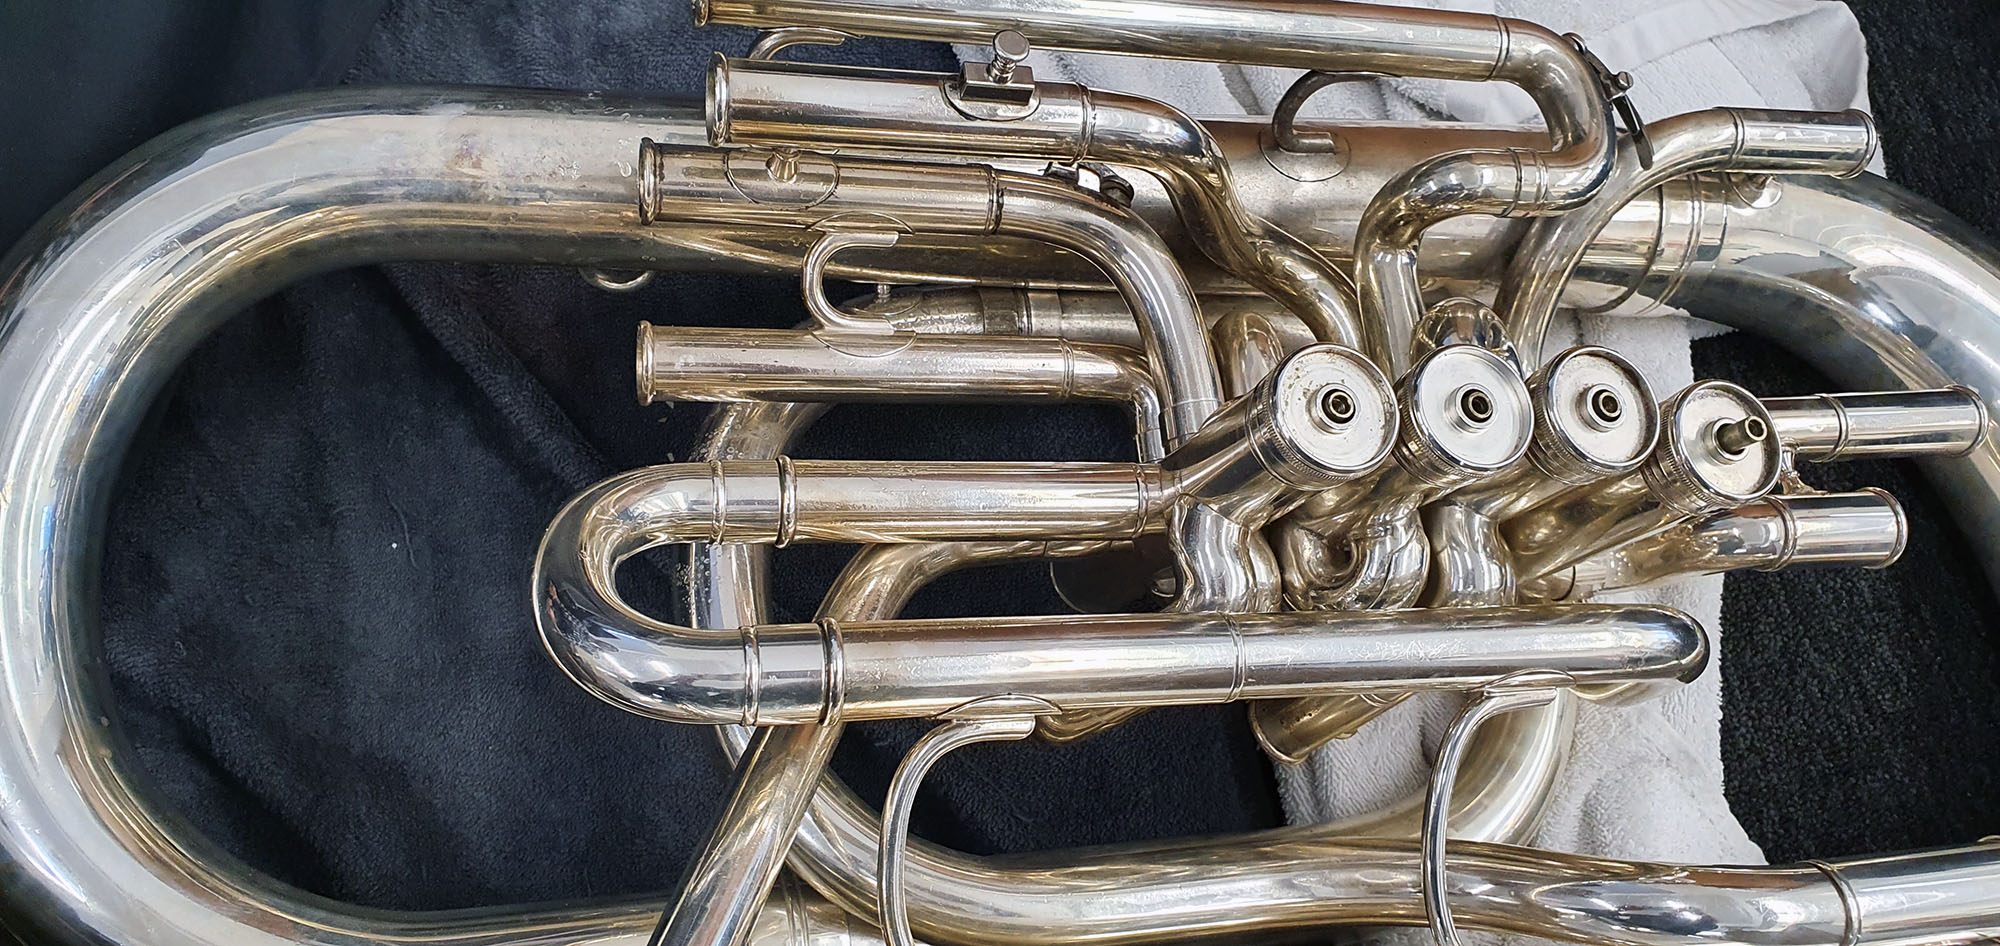 The Brass Instrument Family: French Horns, Trombones, Low Brass